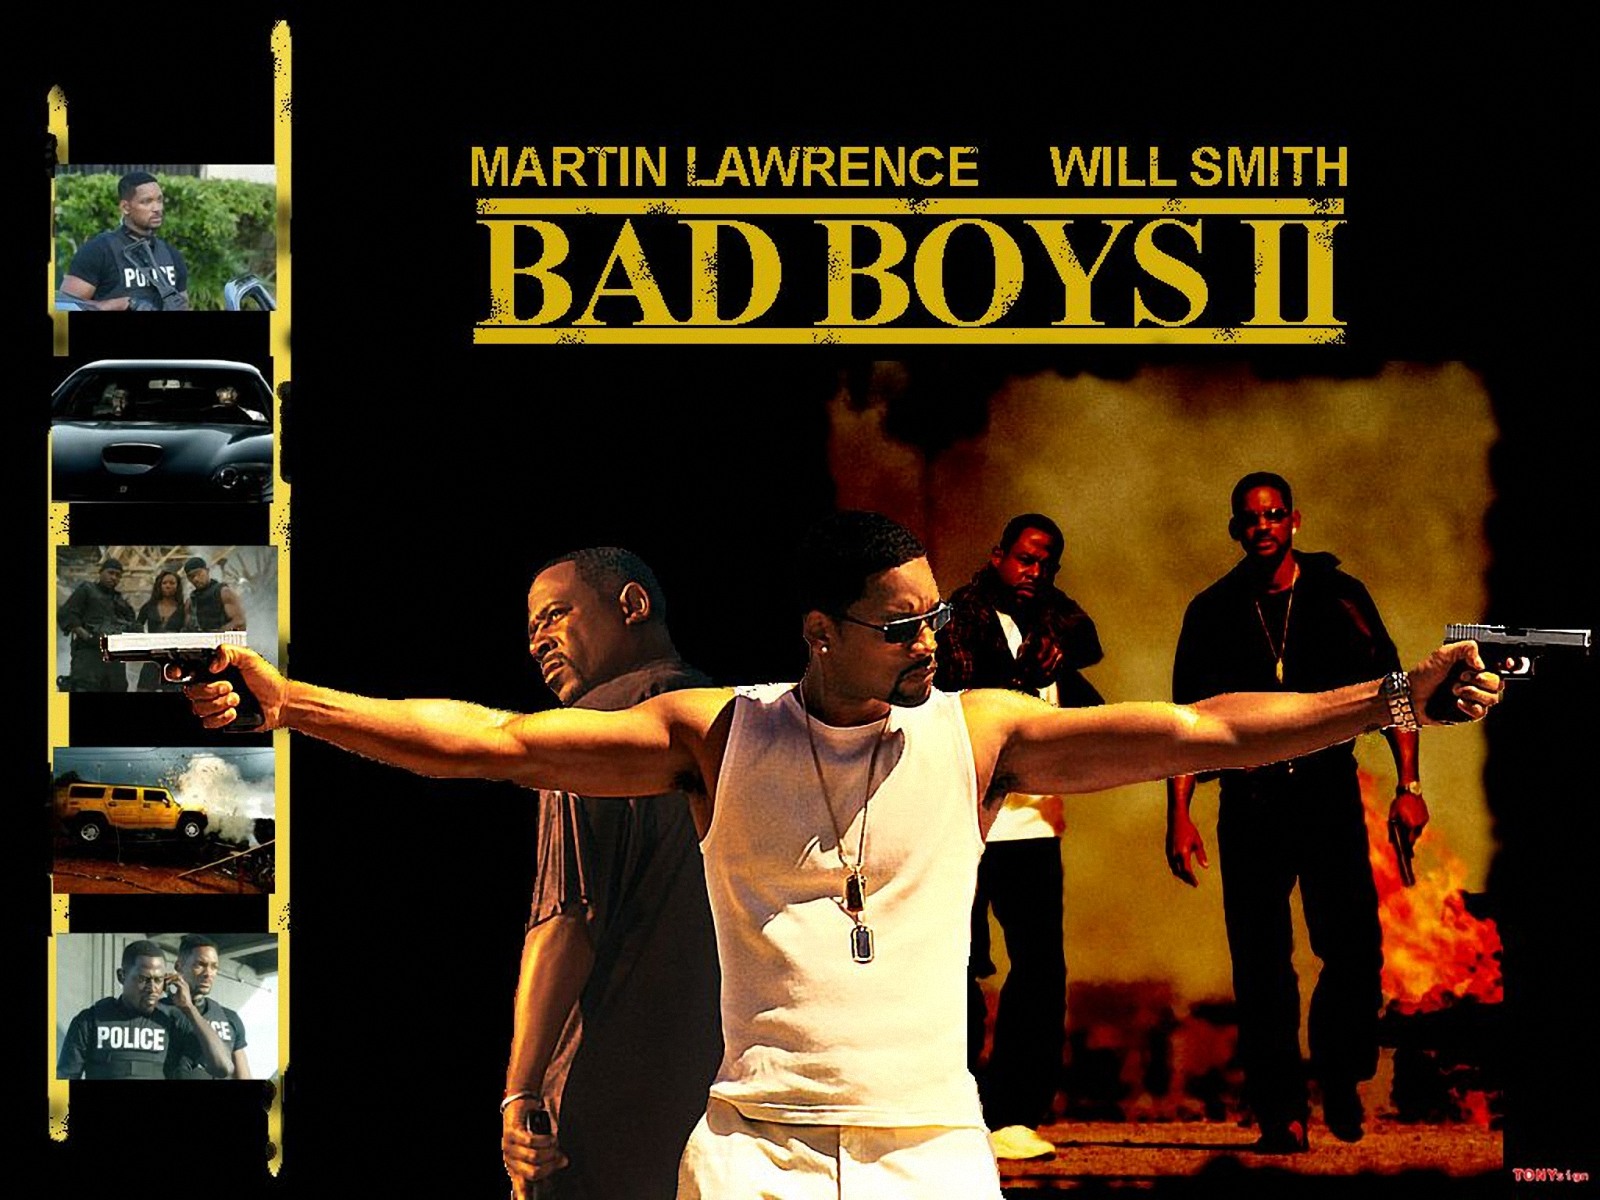 Bad Boys II Wallpaper WallpapersBad Boys II Wallpapers Pictures